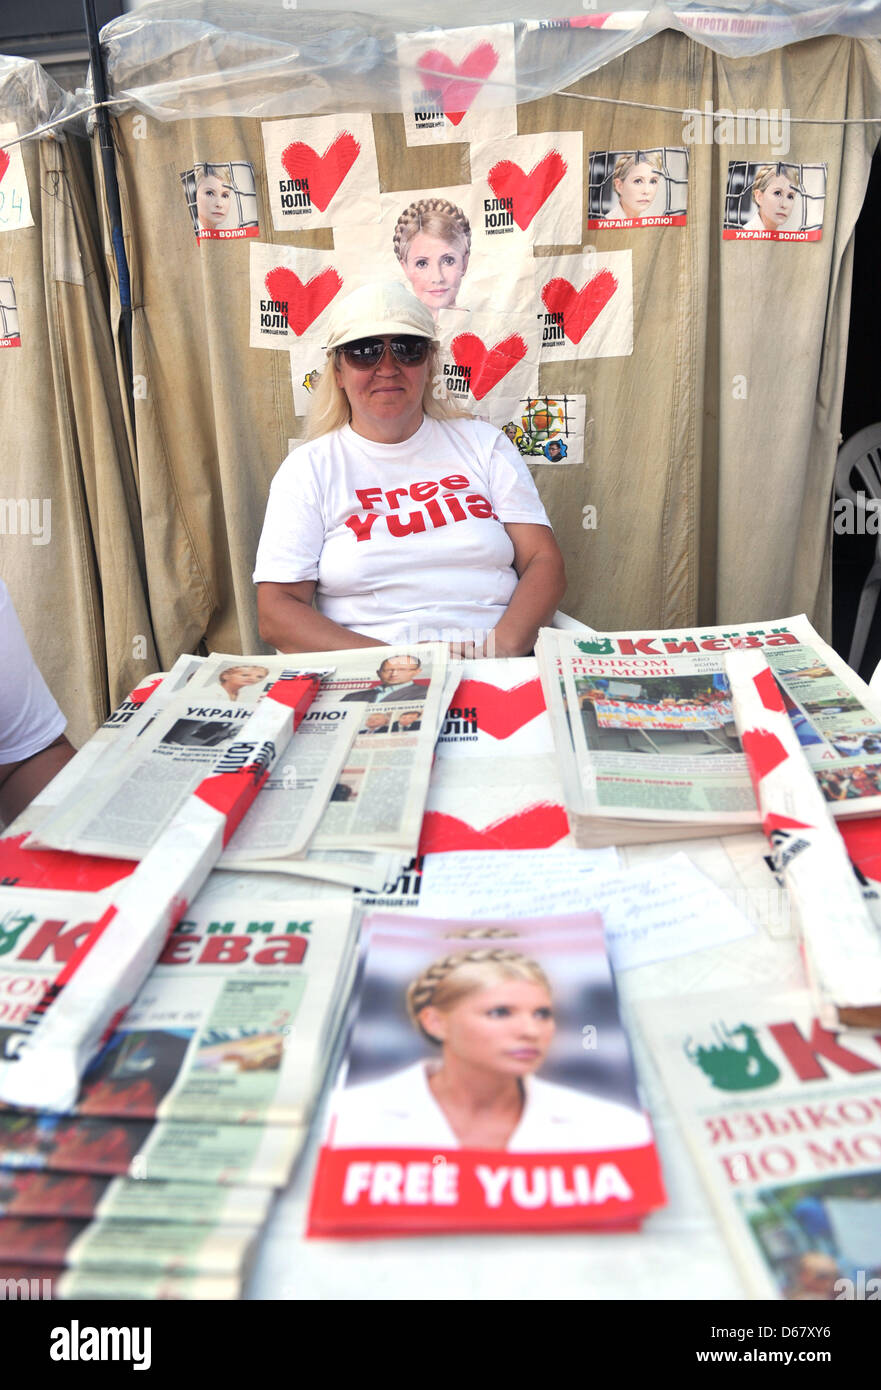 An activist sits in front of photos of the Ukranian politician Yulia Tymoshenko in a protest camp in downtown Kiev, Ukraine, 30 June 2012. The Euro 2012 championships were discussed controversially over the case of Ukraine's jailed former Prime Minister Yulia Tymoshenko. Photo: ANDREAS GEBERT Stock Photo